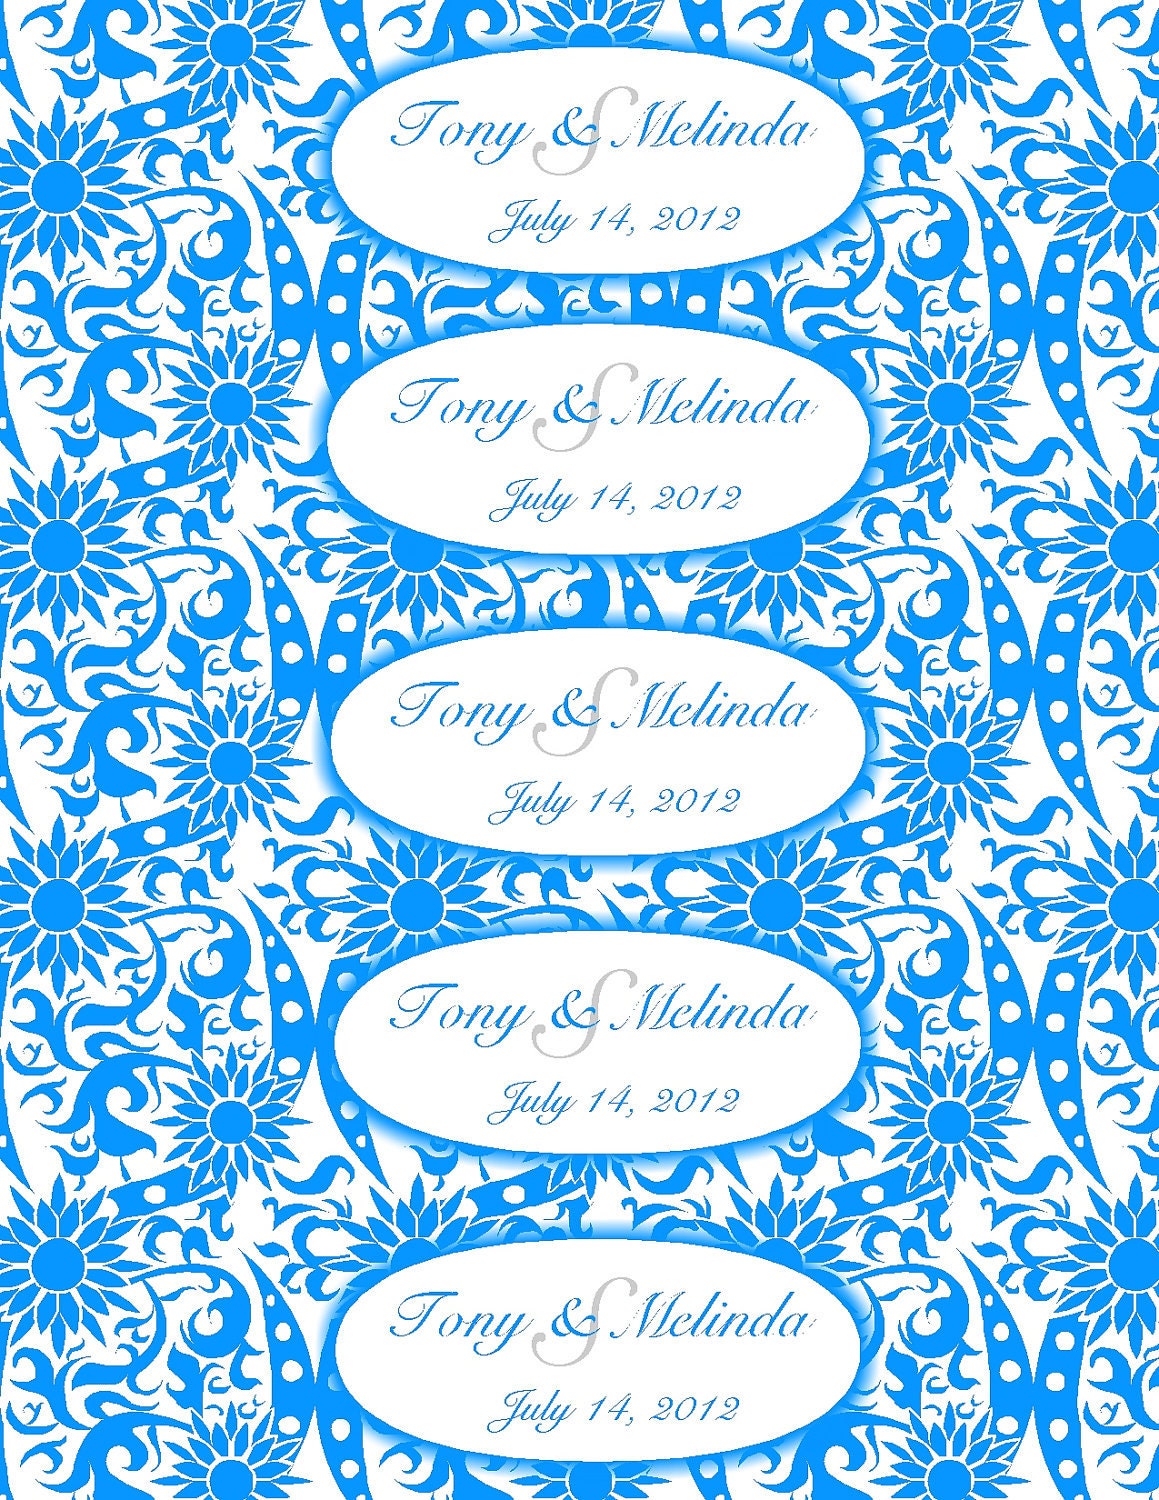 Printable Personalized Wedding Labels for Water Bottles From jcsaccents